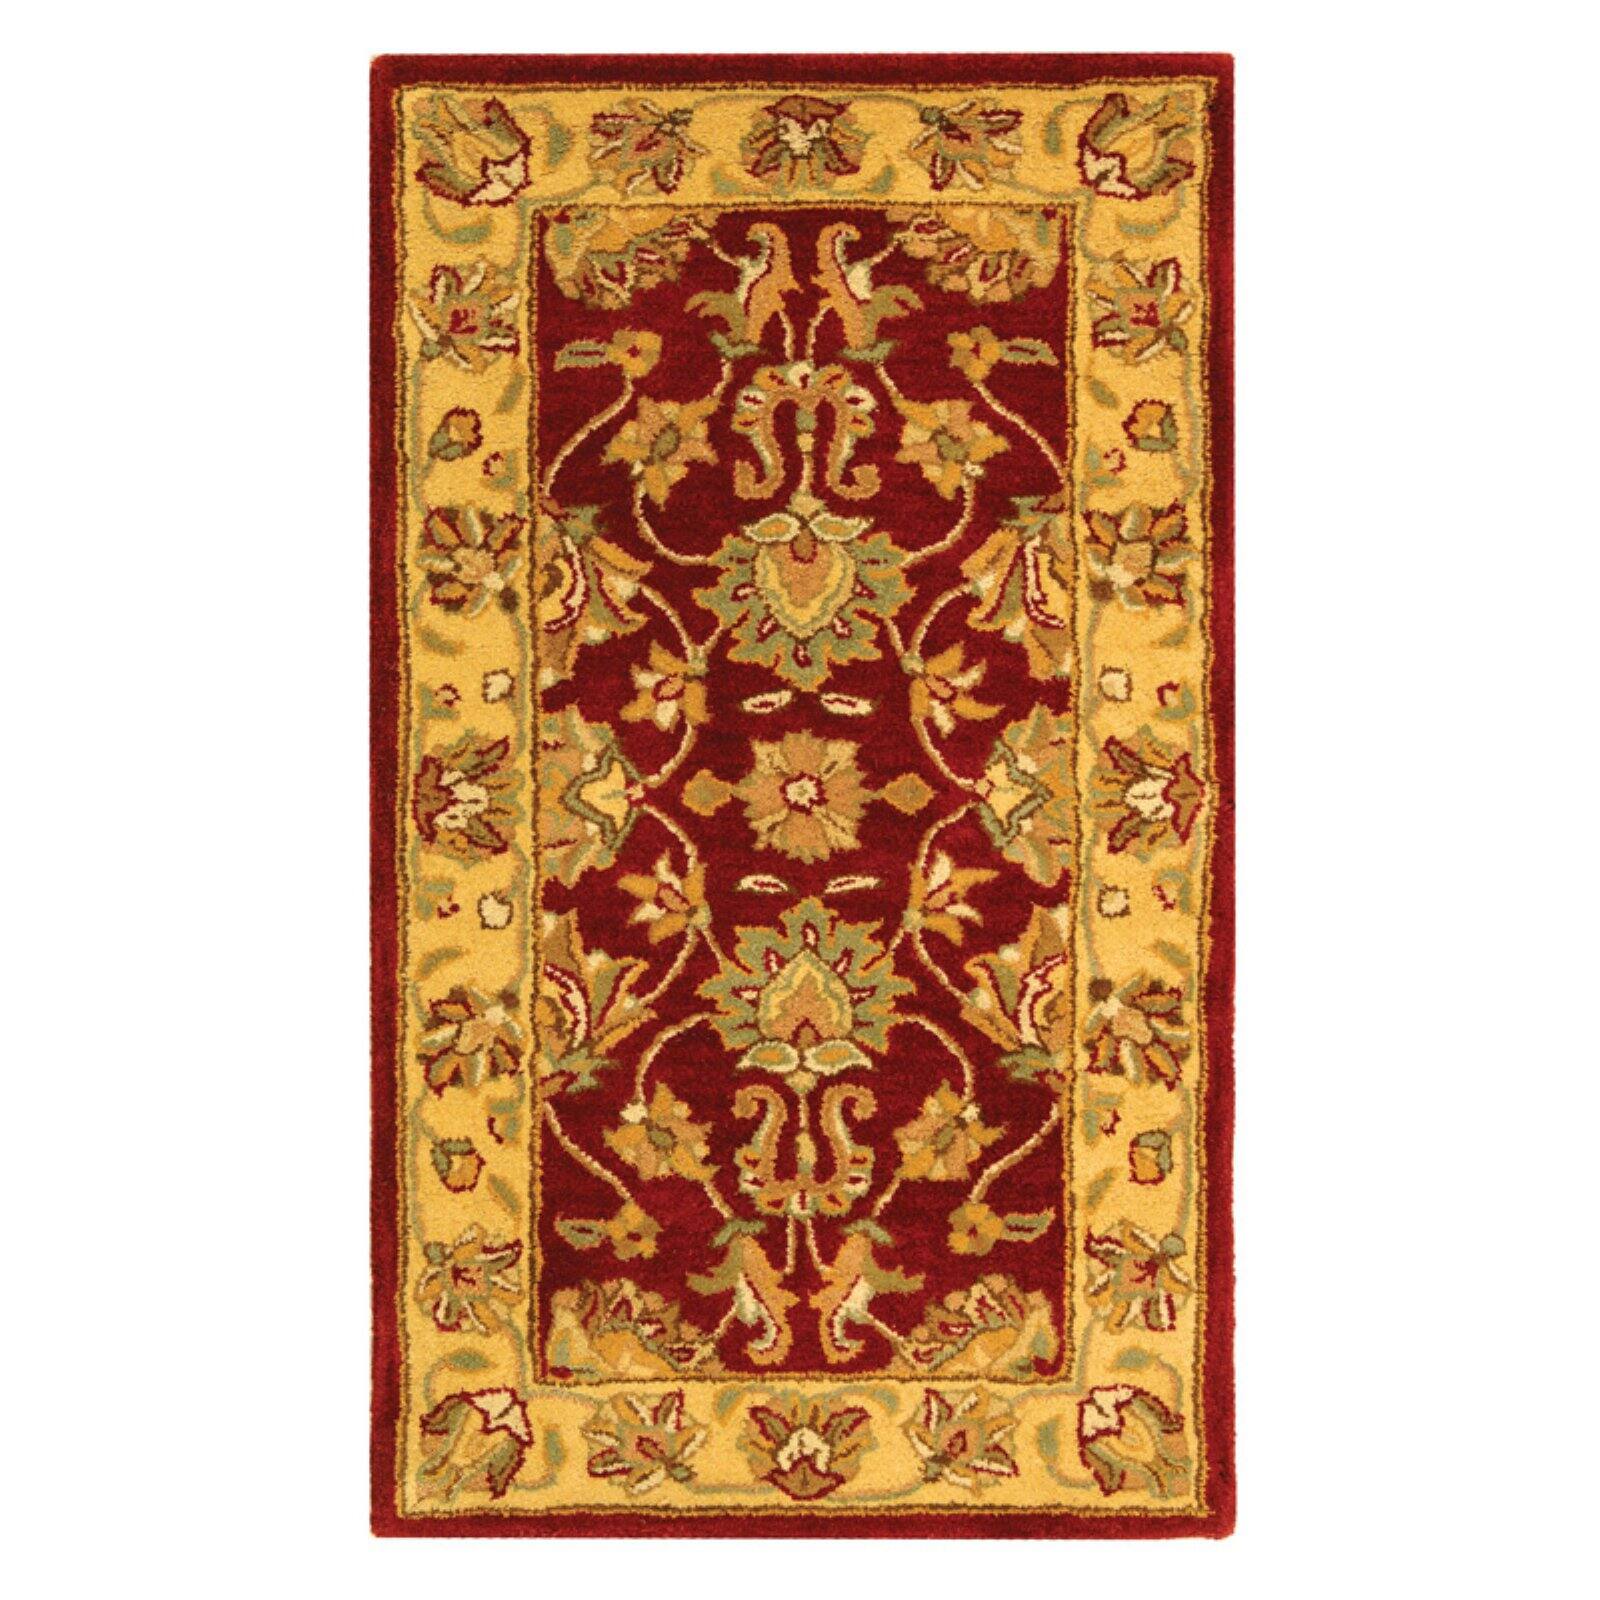 SAFAVIEH Heritage Regis Traditional Wool Area Rug, Red/Gold, 7'6" x 9'6" - image 2 of 9